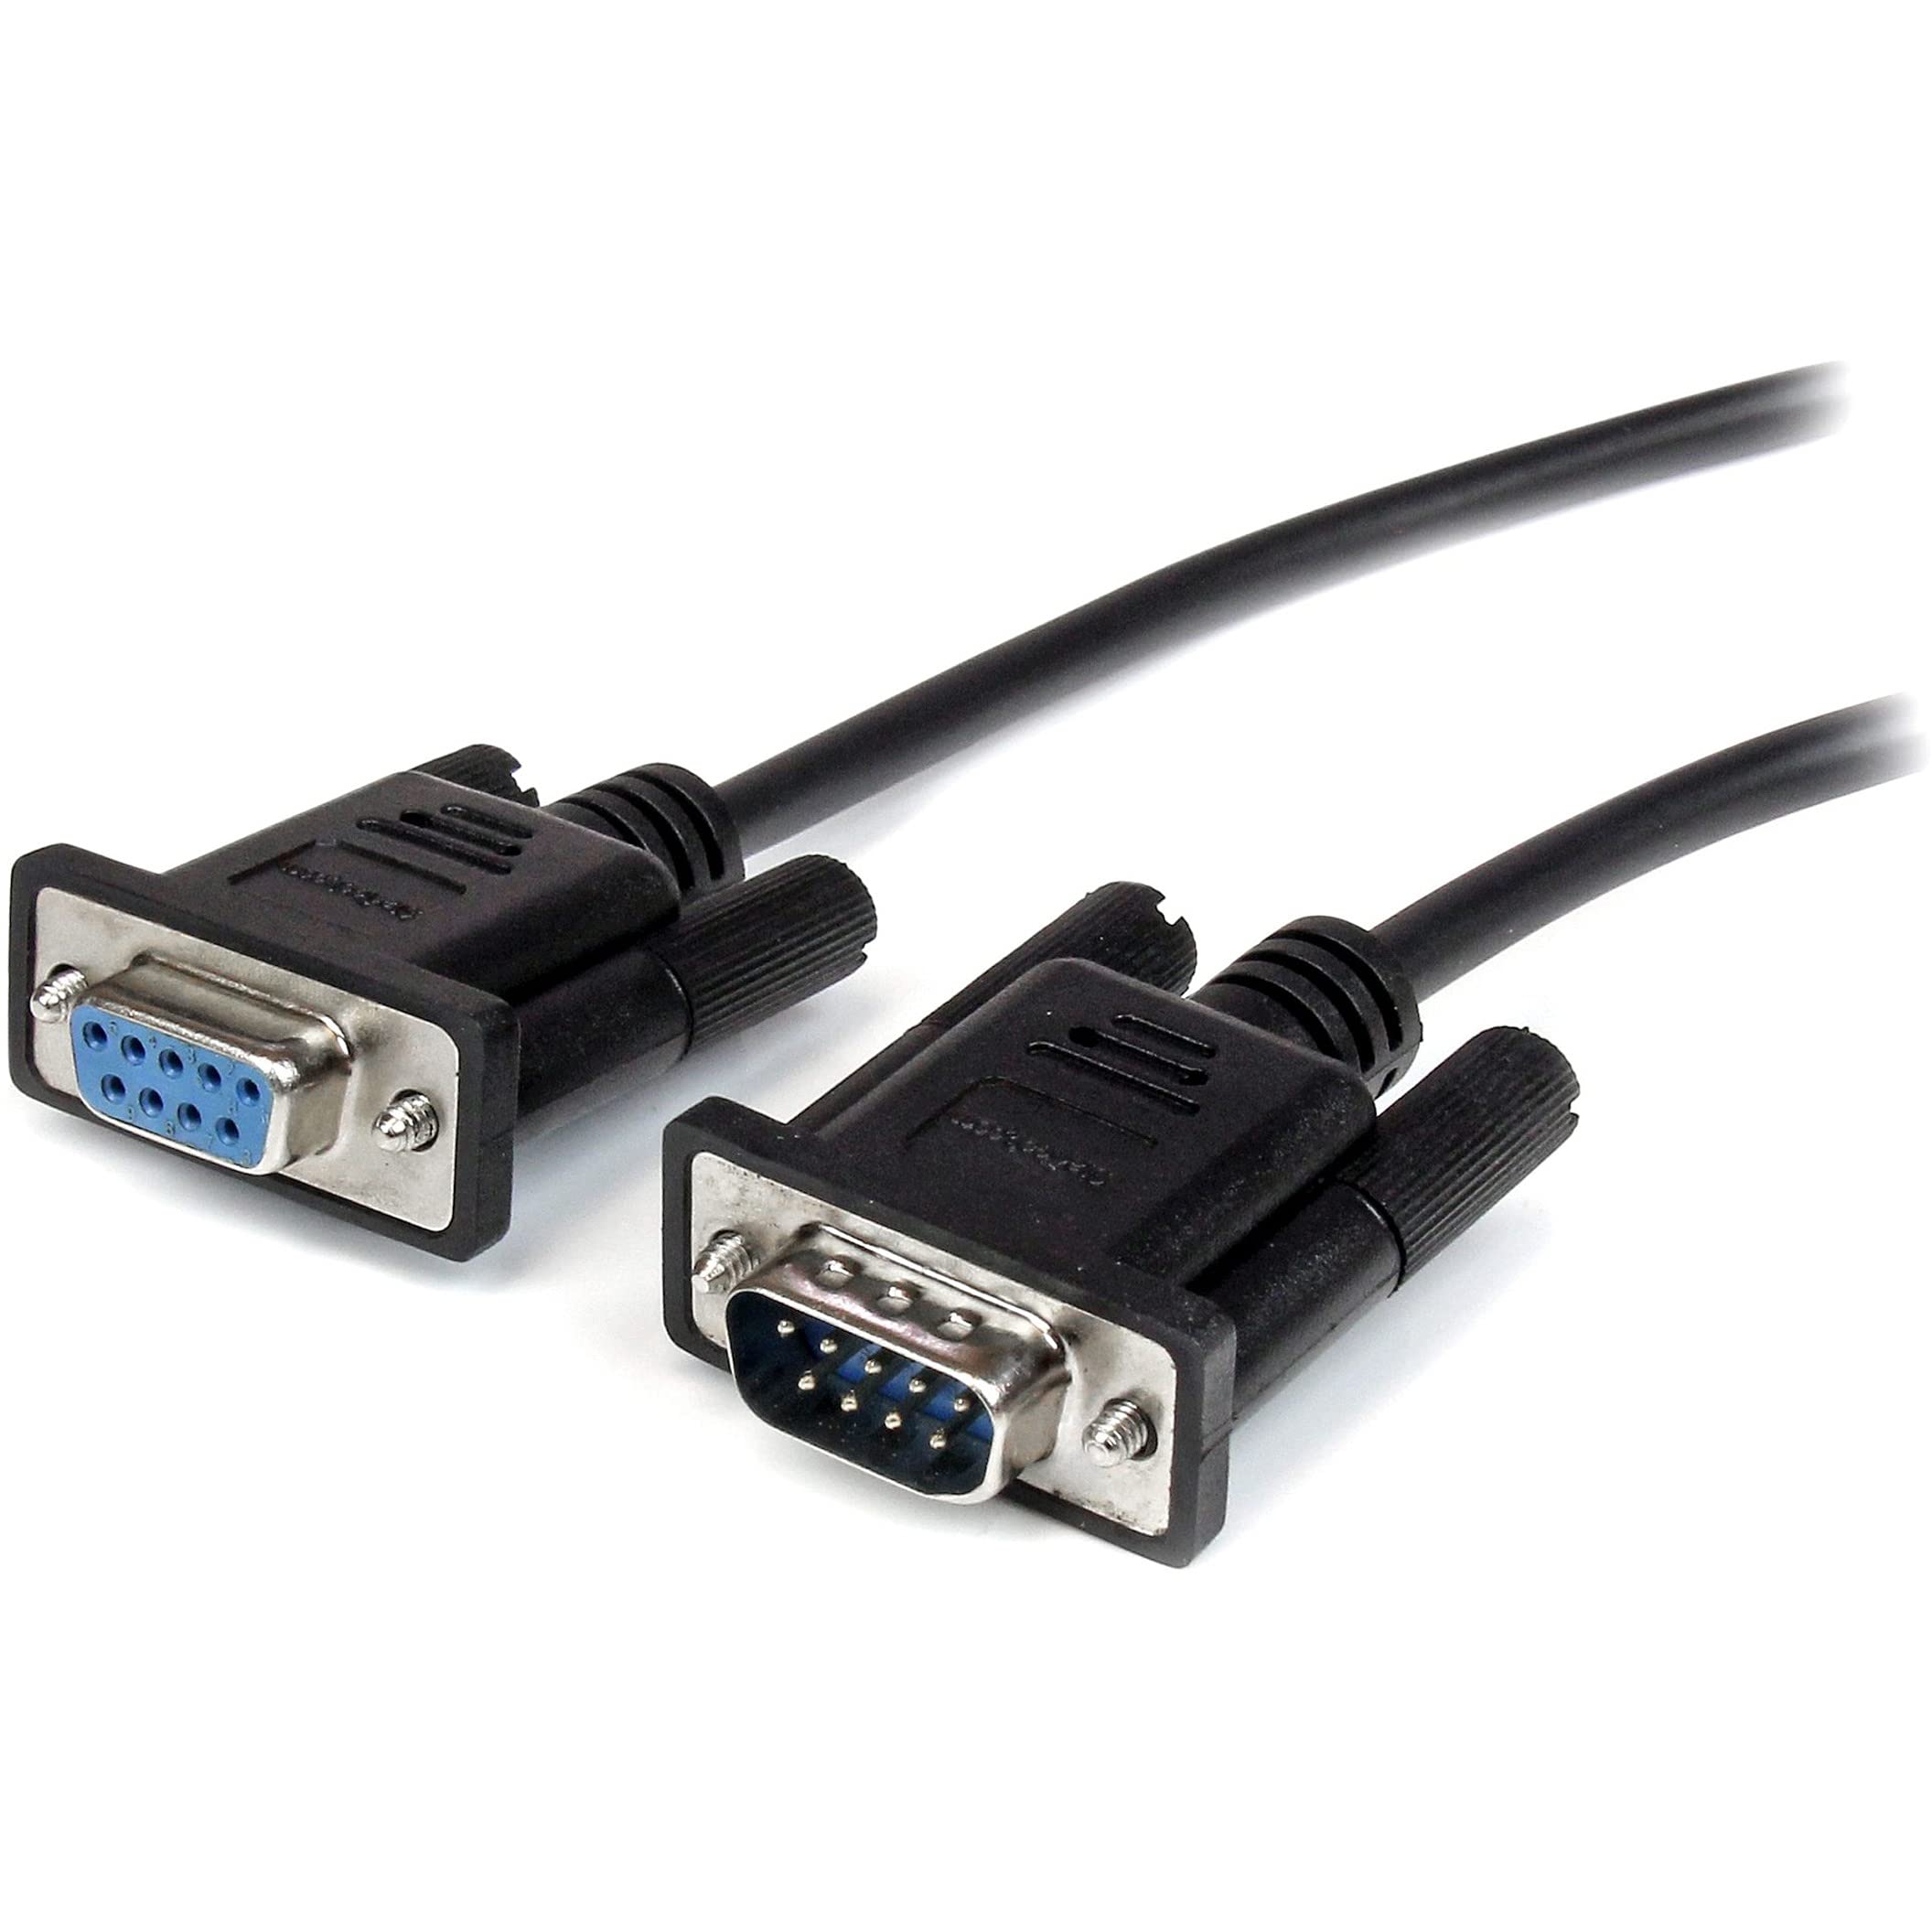 StarTech.com 3m Black Straight Through DB9 RS232 Serial Cable - DB9 RS232 Serial Extension Cable - Male to Female Cable (MXT1003MBK), 10 ft / 3m